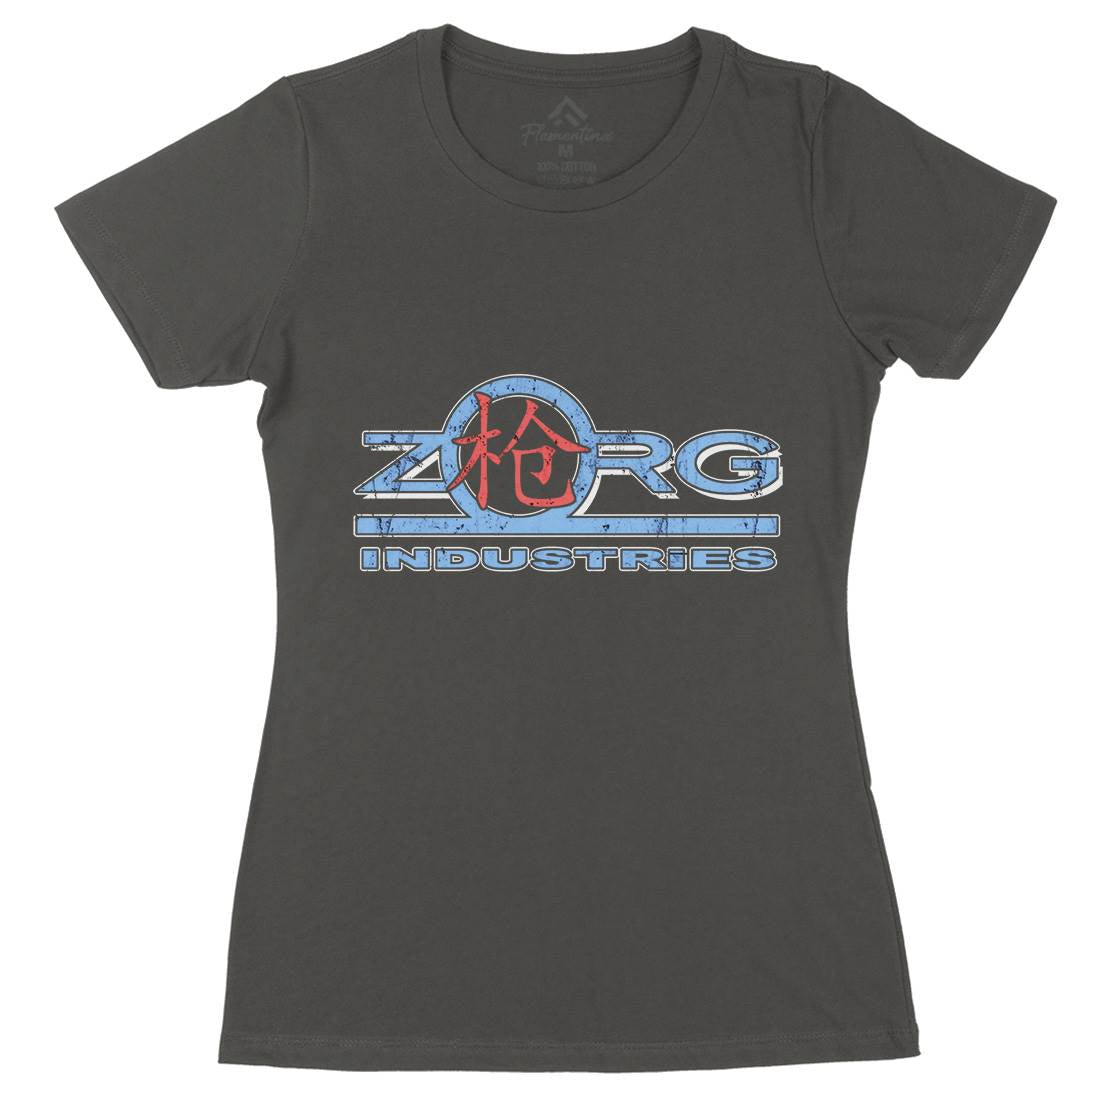 Zorg Ind Womens Organic Crew Neck T-Shirt Space D105